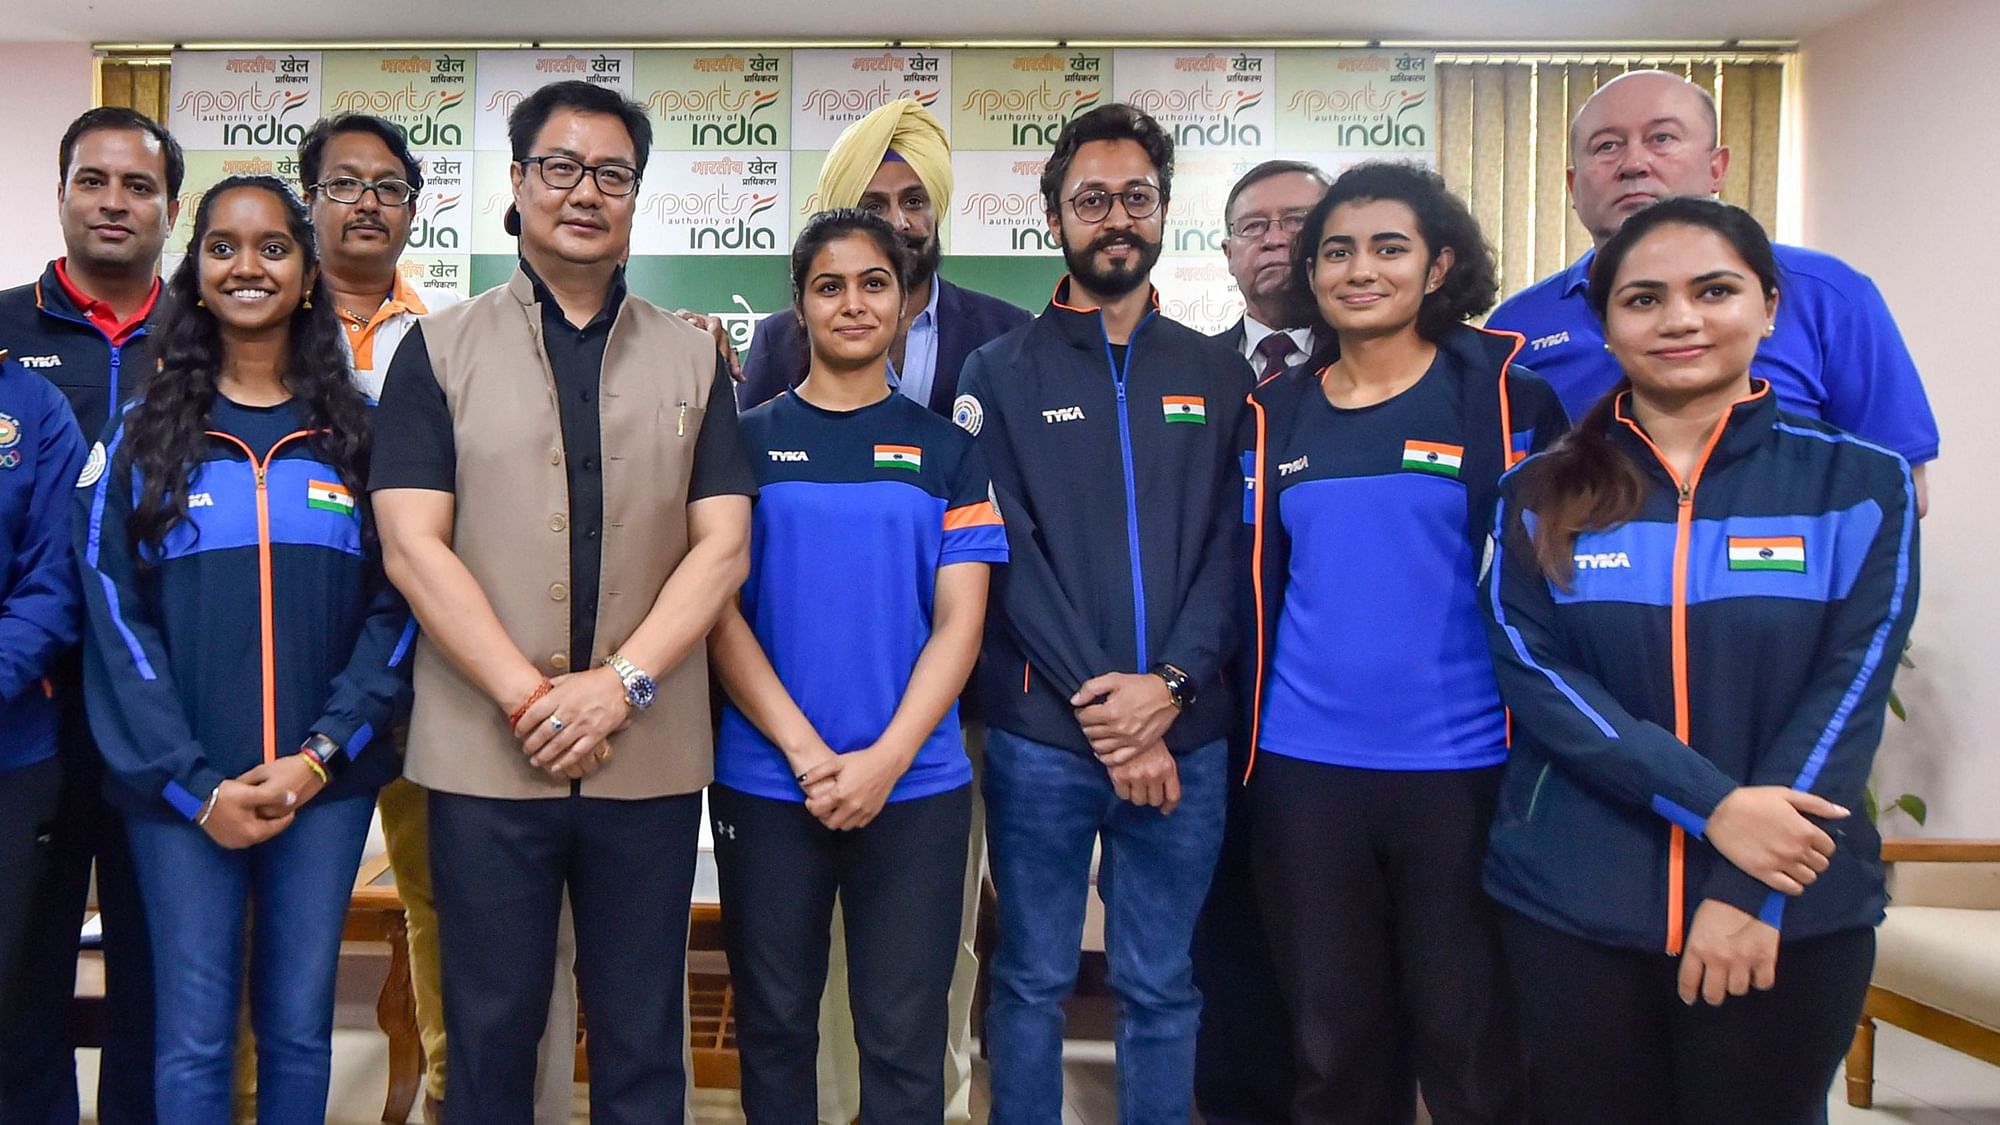 Union Minister of Youth Affairs and Sports Kiren Rijiju spoke to elite athletes to understand their requirement to resume training once the nation-wide lockdown is lifted.